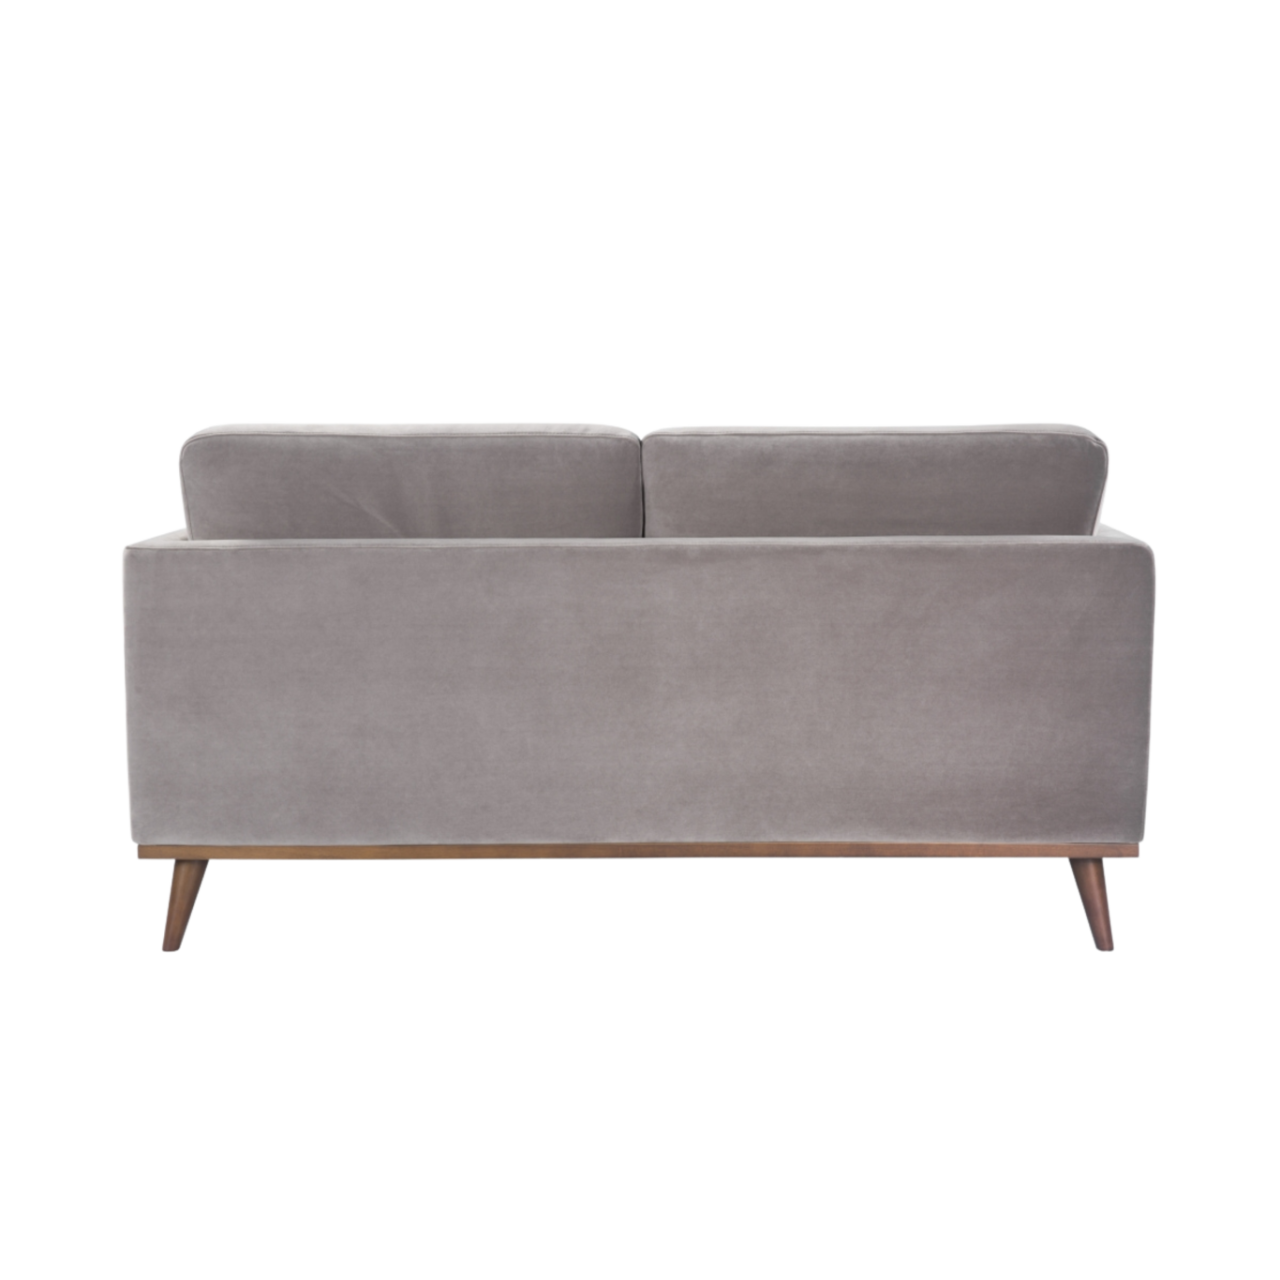 back view of Simple, modern shaped 2 seater sofa in stone grey velvet upholstery